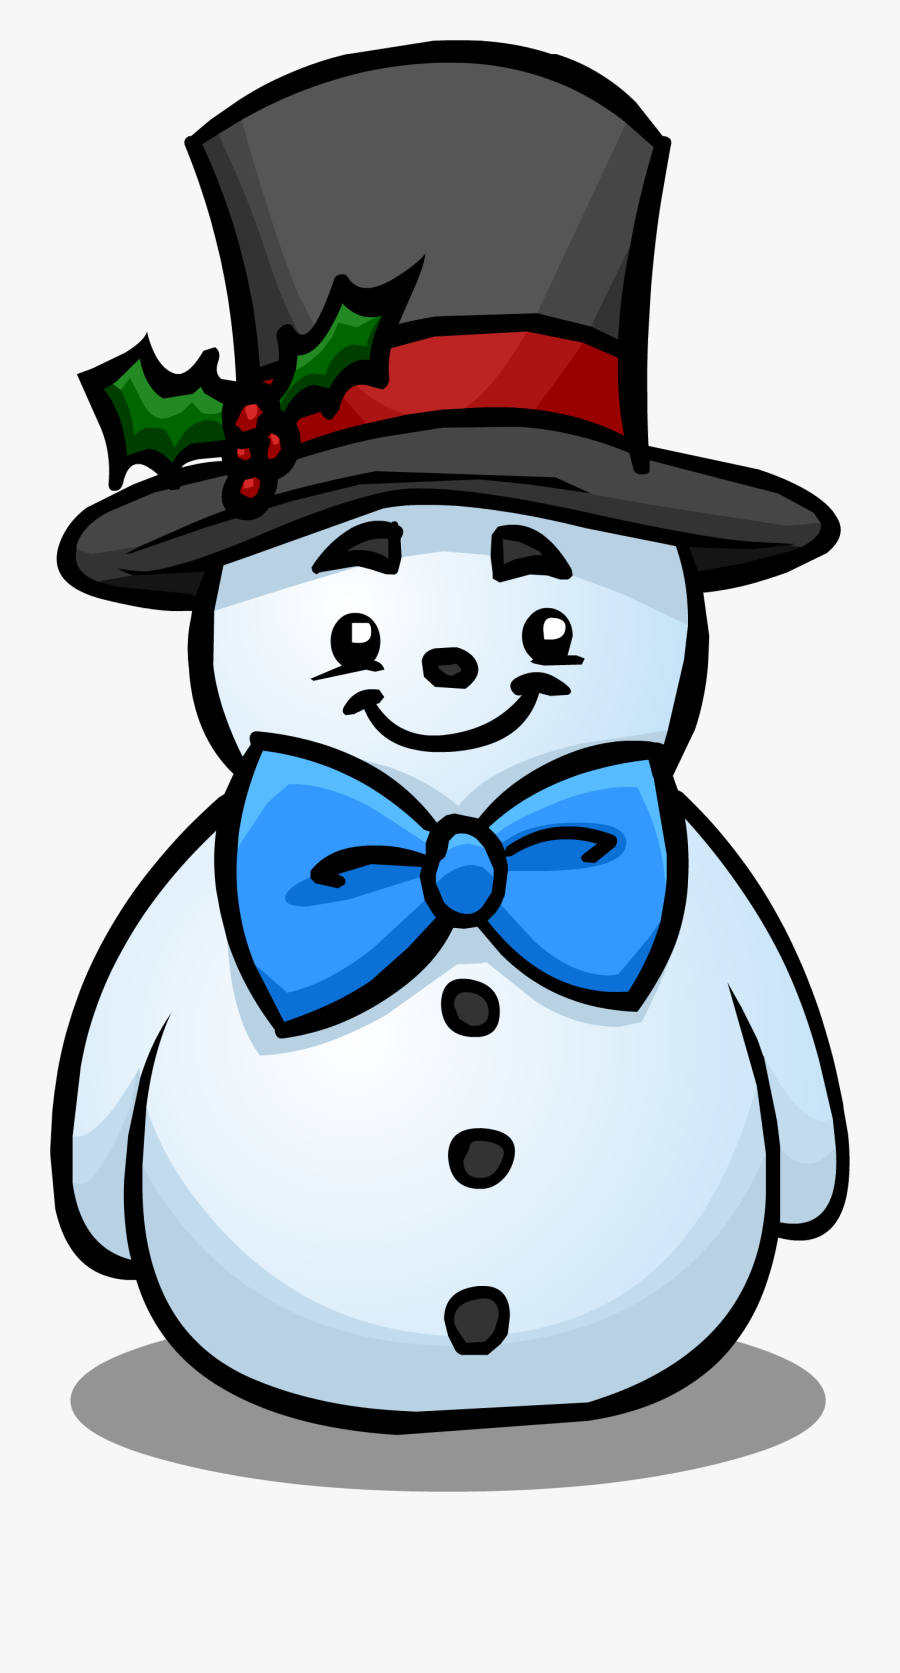 Snowman With Top Hat - Top Hat For A Snowman, Transparent Clipart